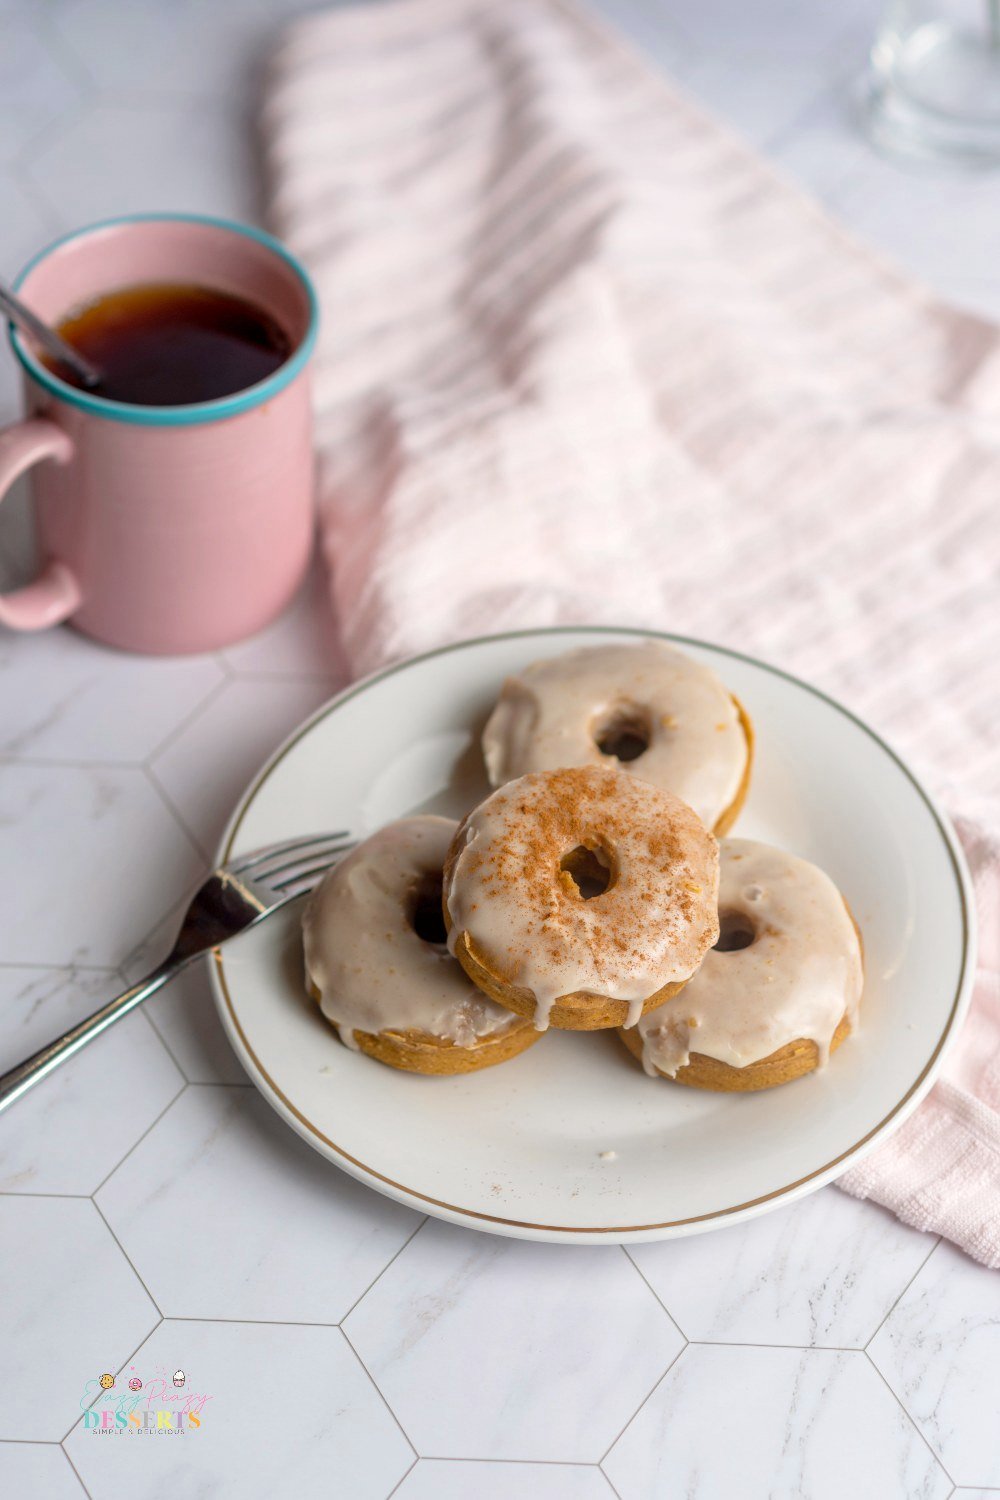 Image of four pumpkin donuts with maple glaze on a serving plate